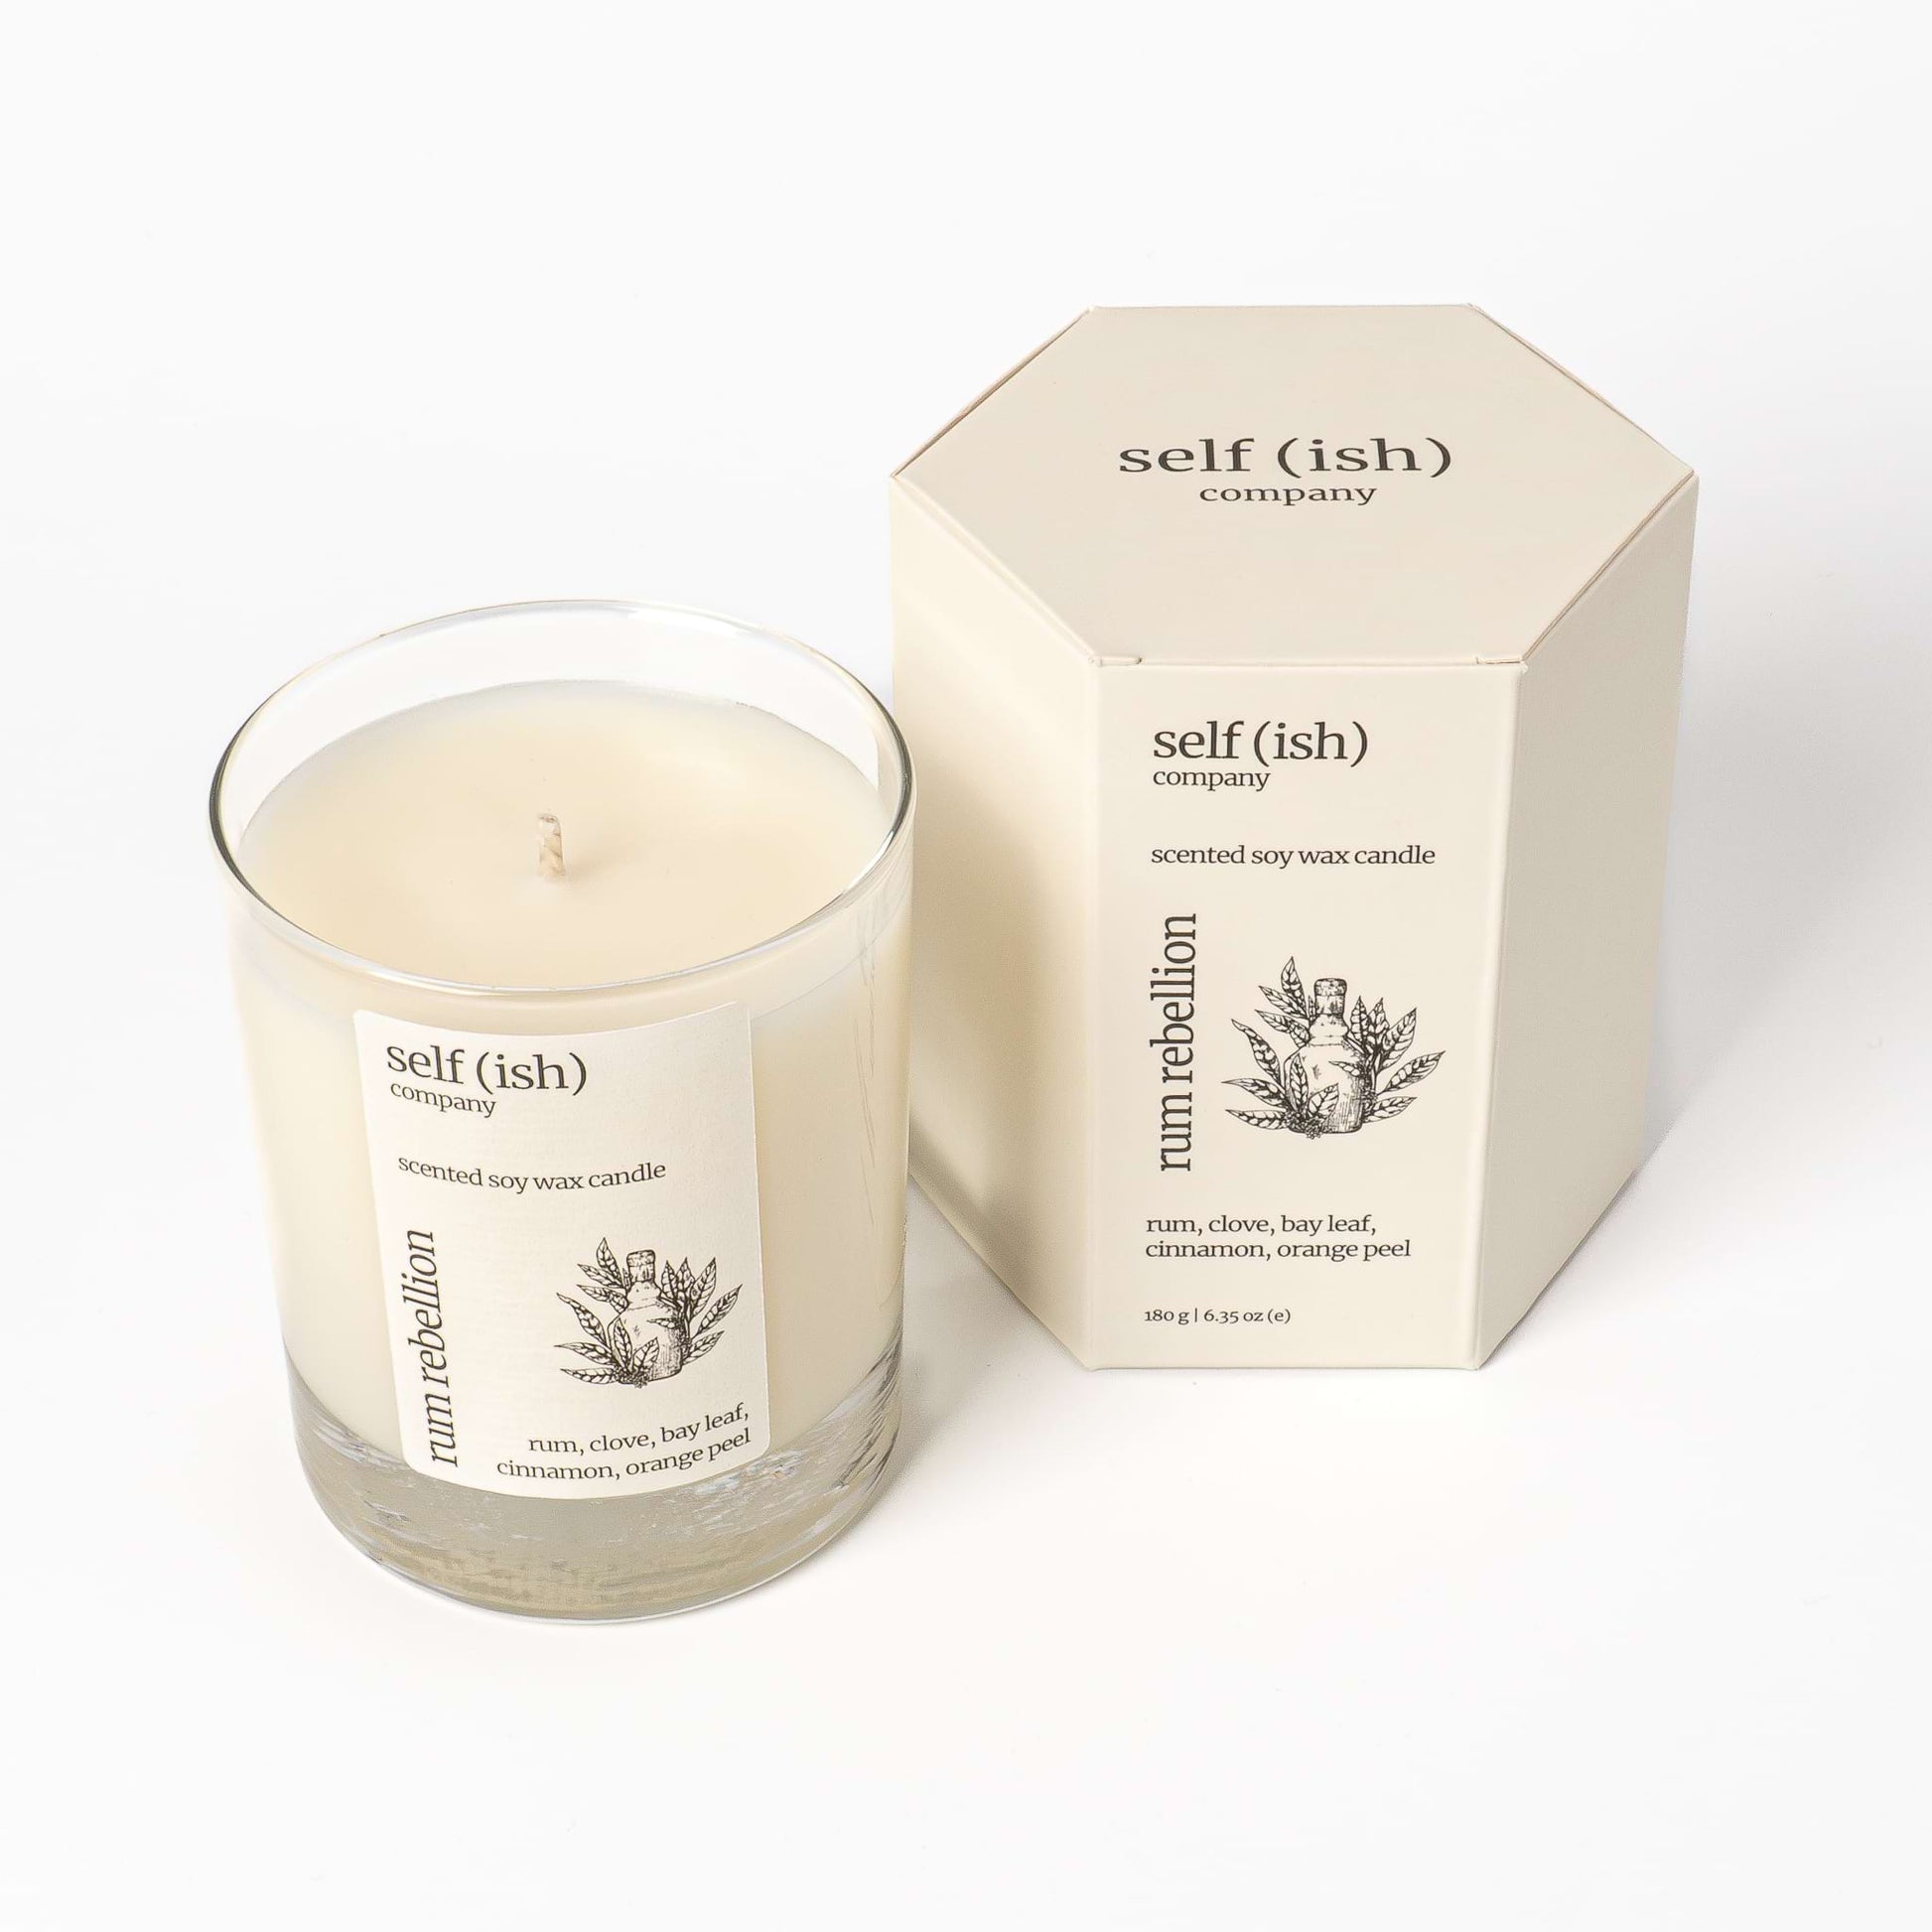 rum soy wax candle with gift packaging for sale in the UK, 100% natural luxury soy candle to buy online from the best candle company in England, paraffin free candle, artisan candle